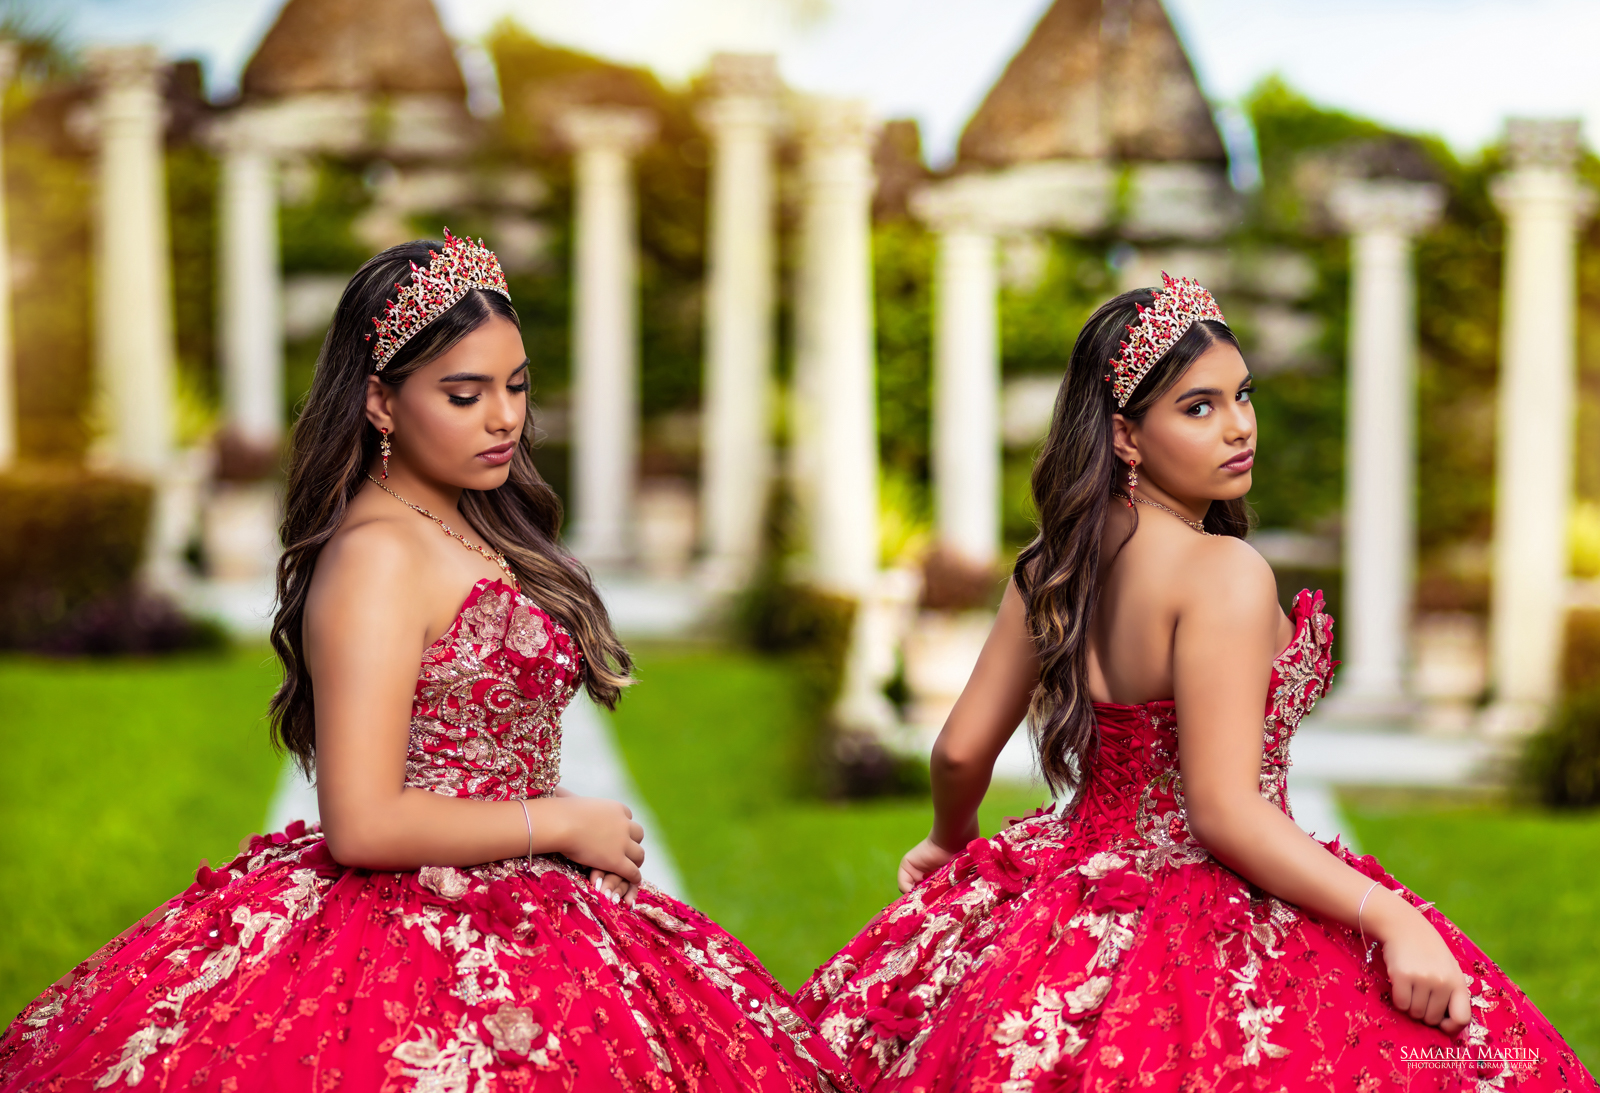 Showing accesories that matches this Royal Dress, red crown for a succesfull quince photo session